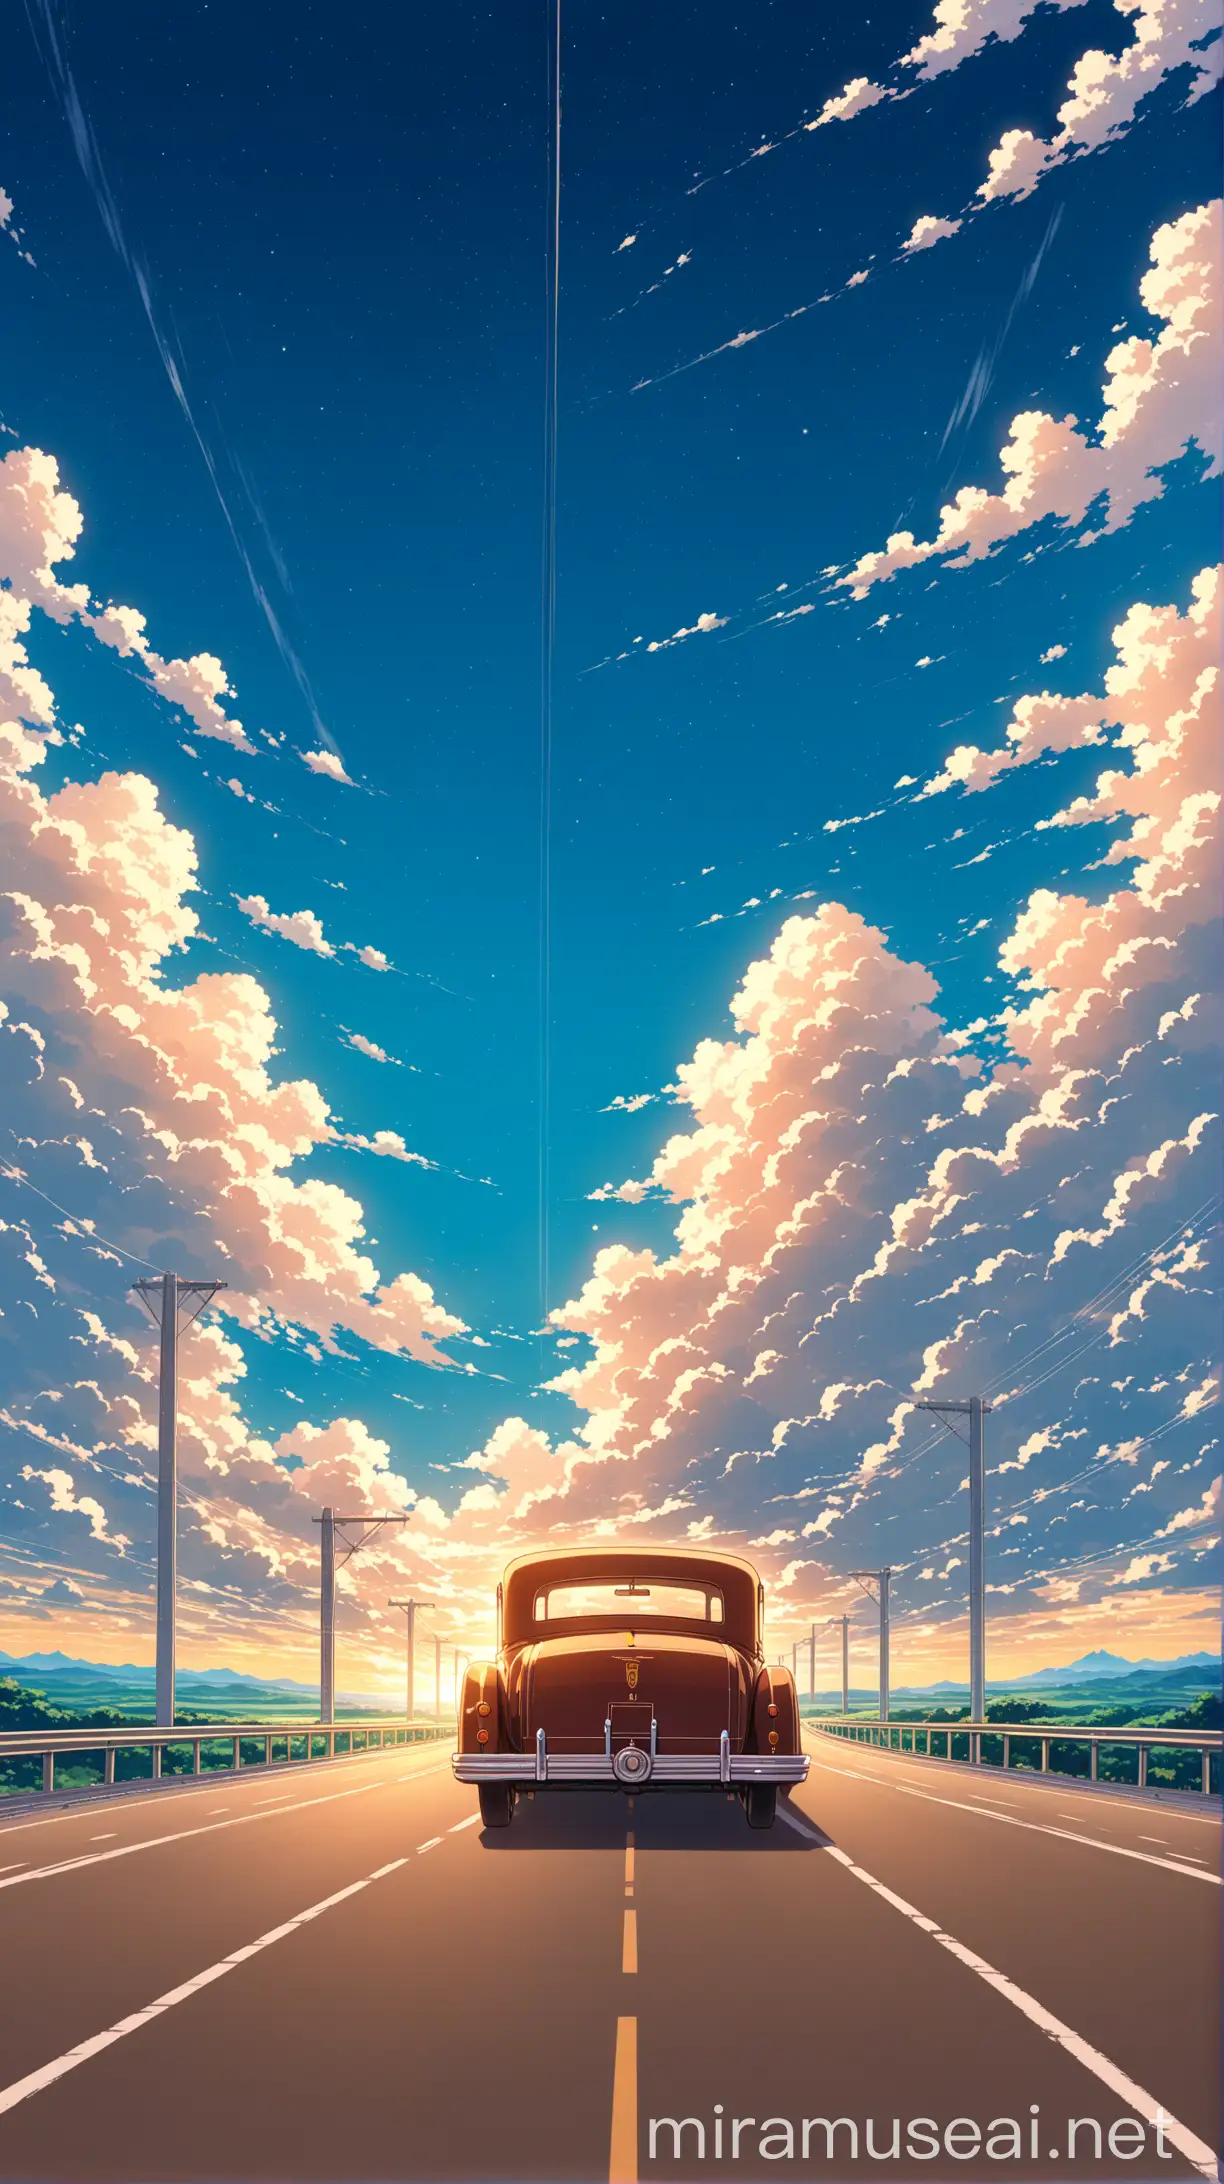 Vintage long car on highway, where the breeze whispers secrets, yet untold, anime sky, cloud